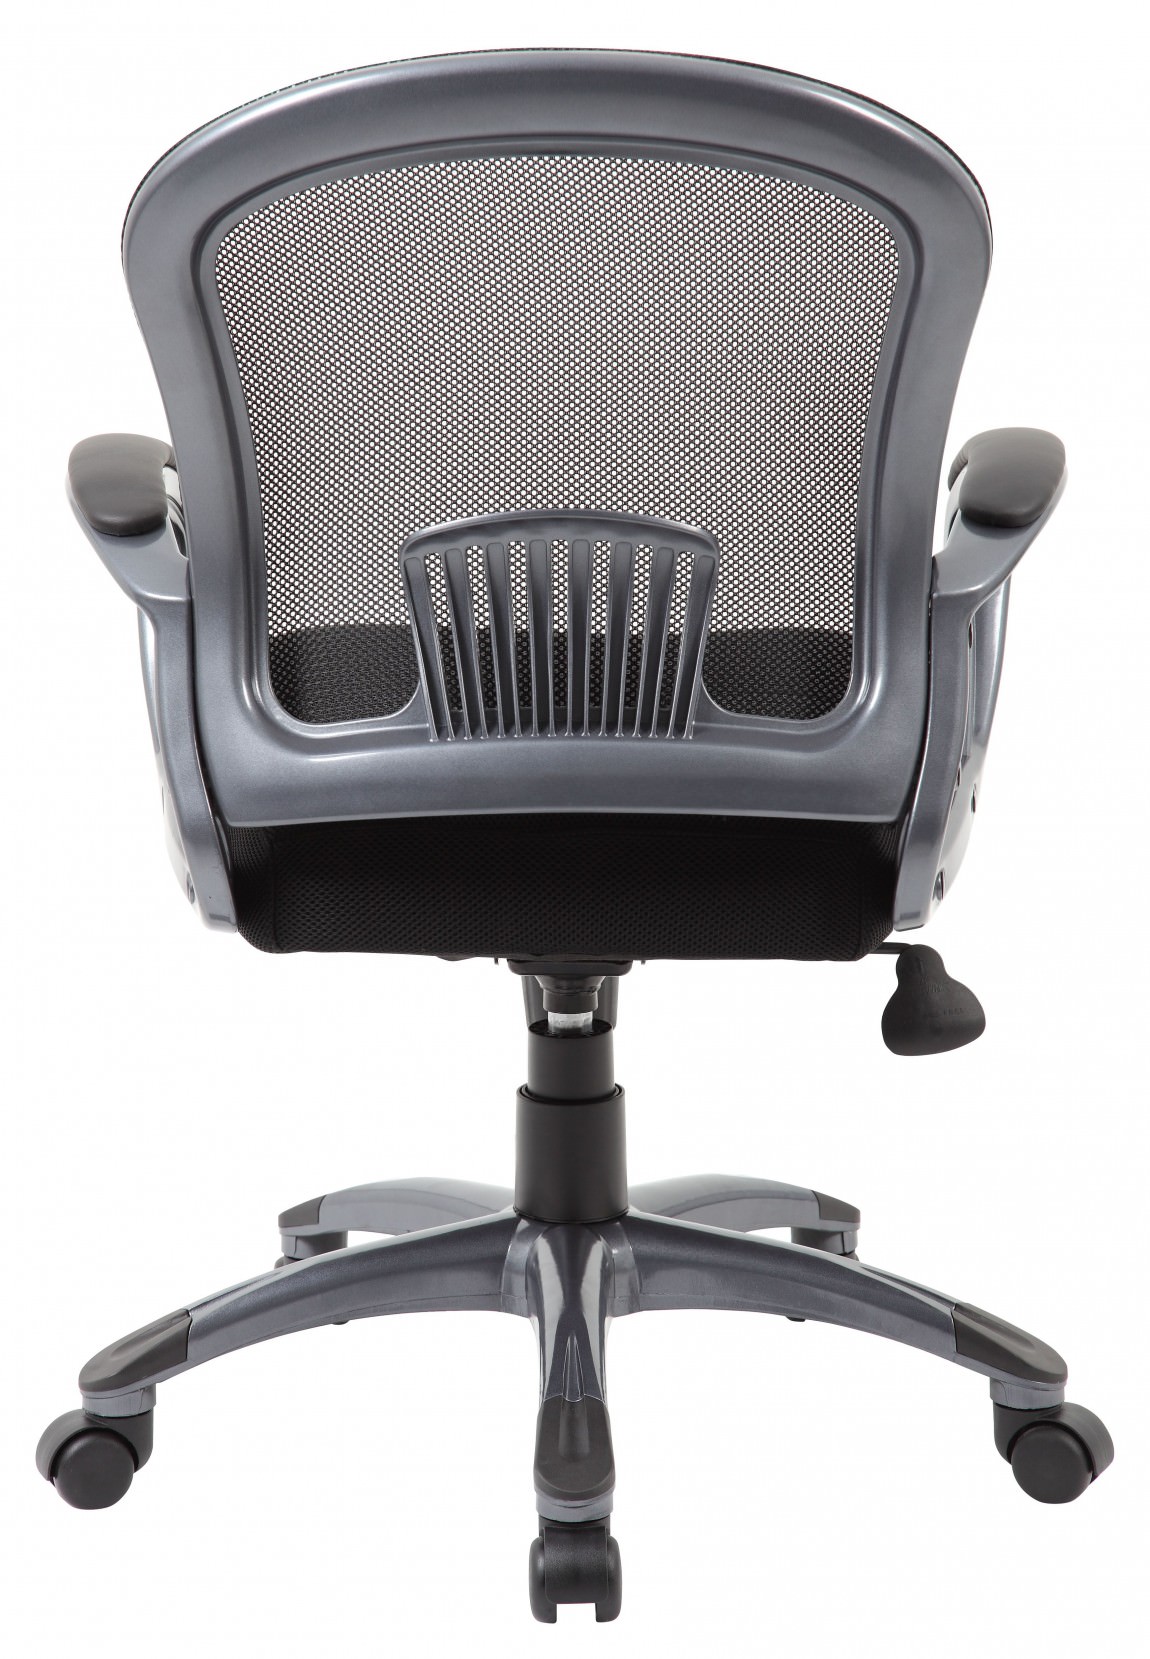 Low Back Office Chair with Arms